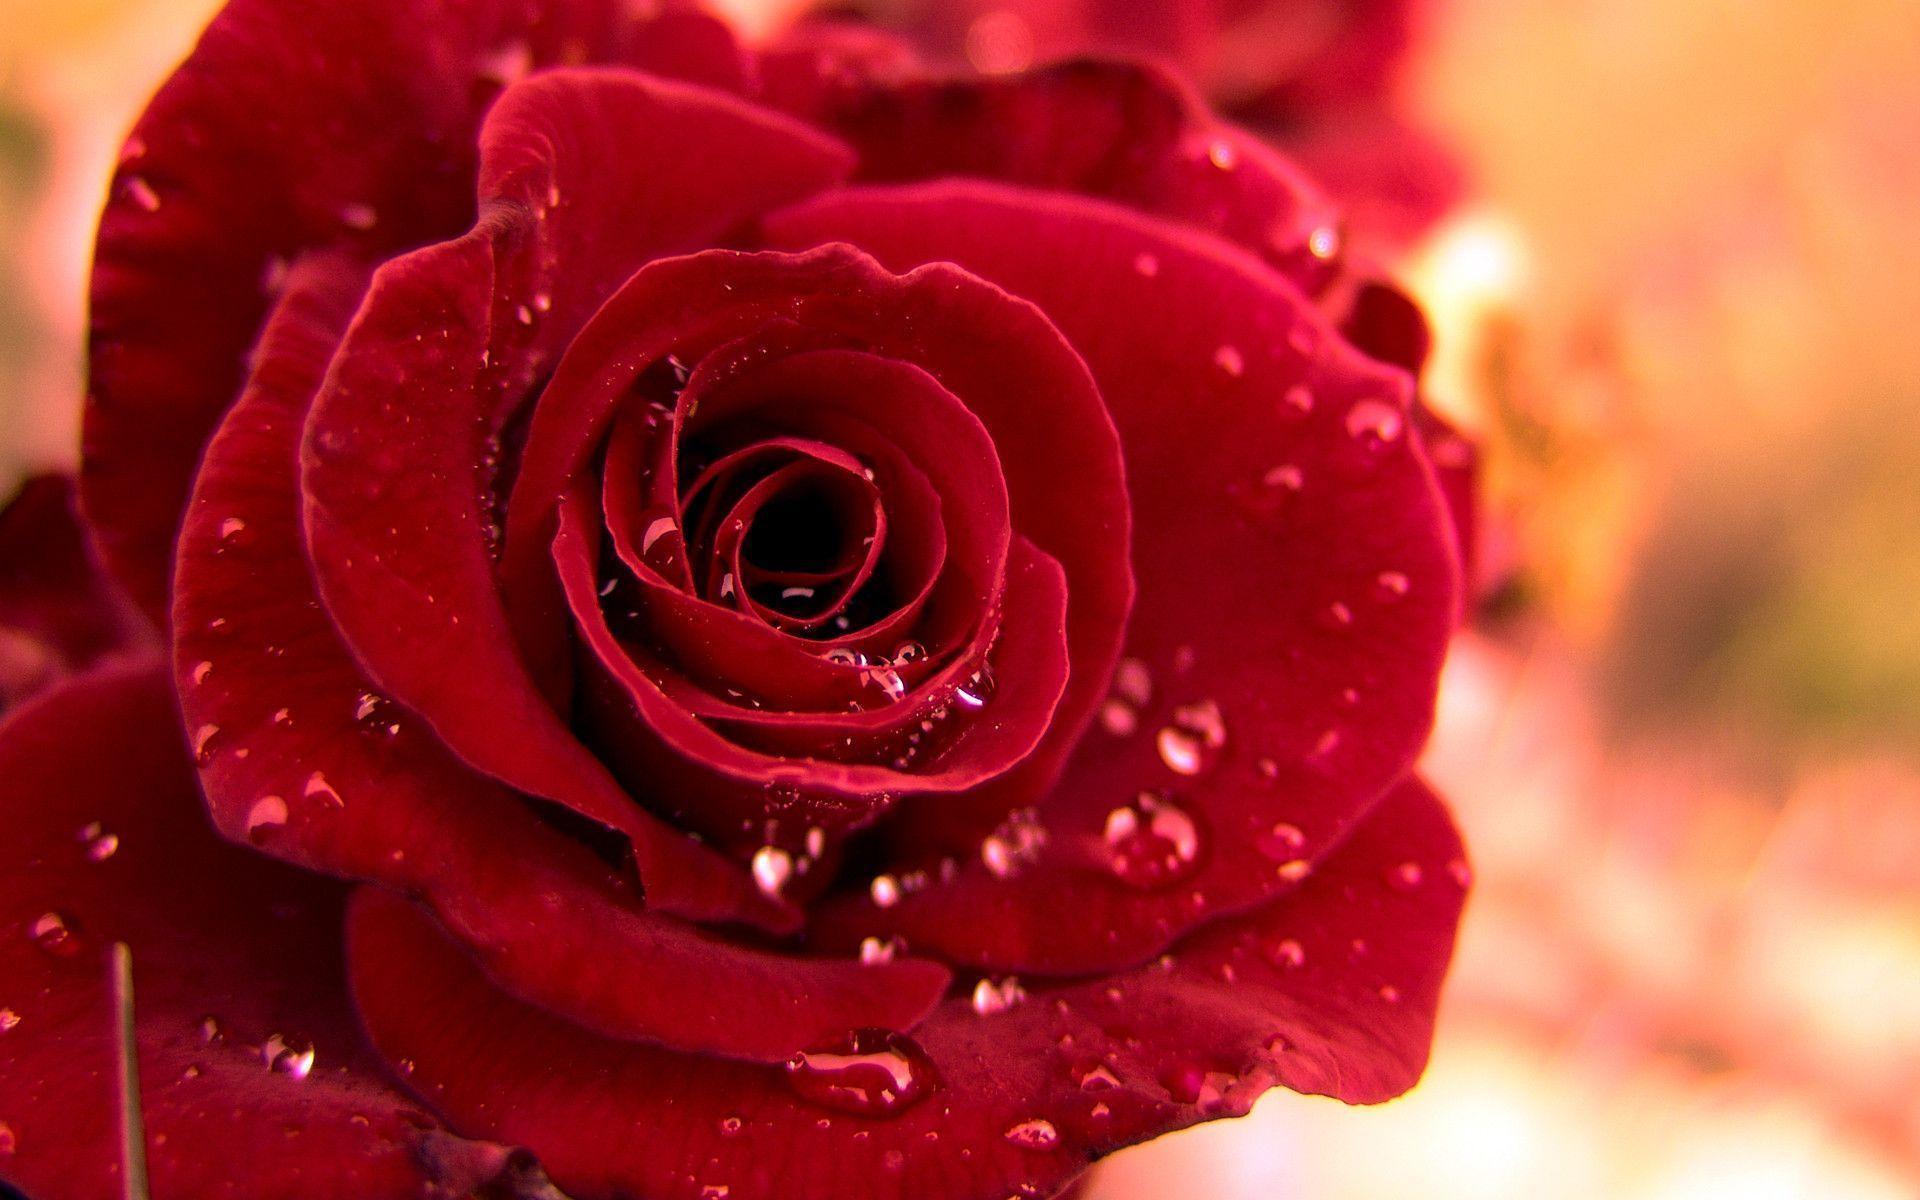 Red Rose HD Wallpaper And Picture. TanukinoSippo